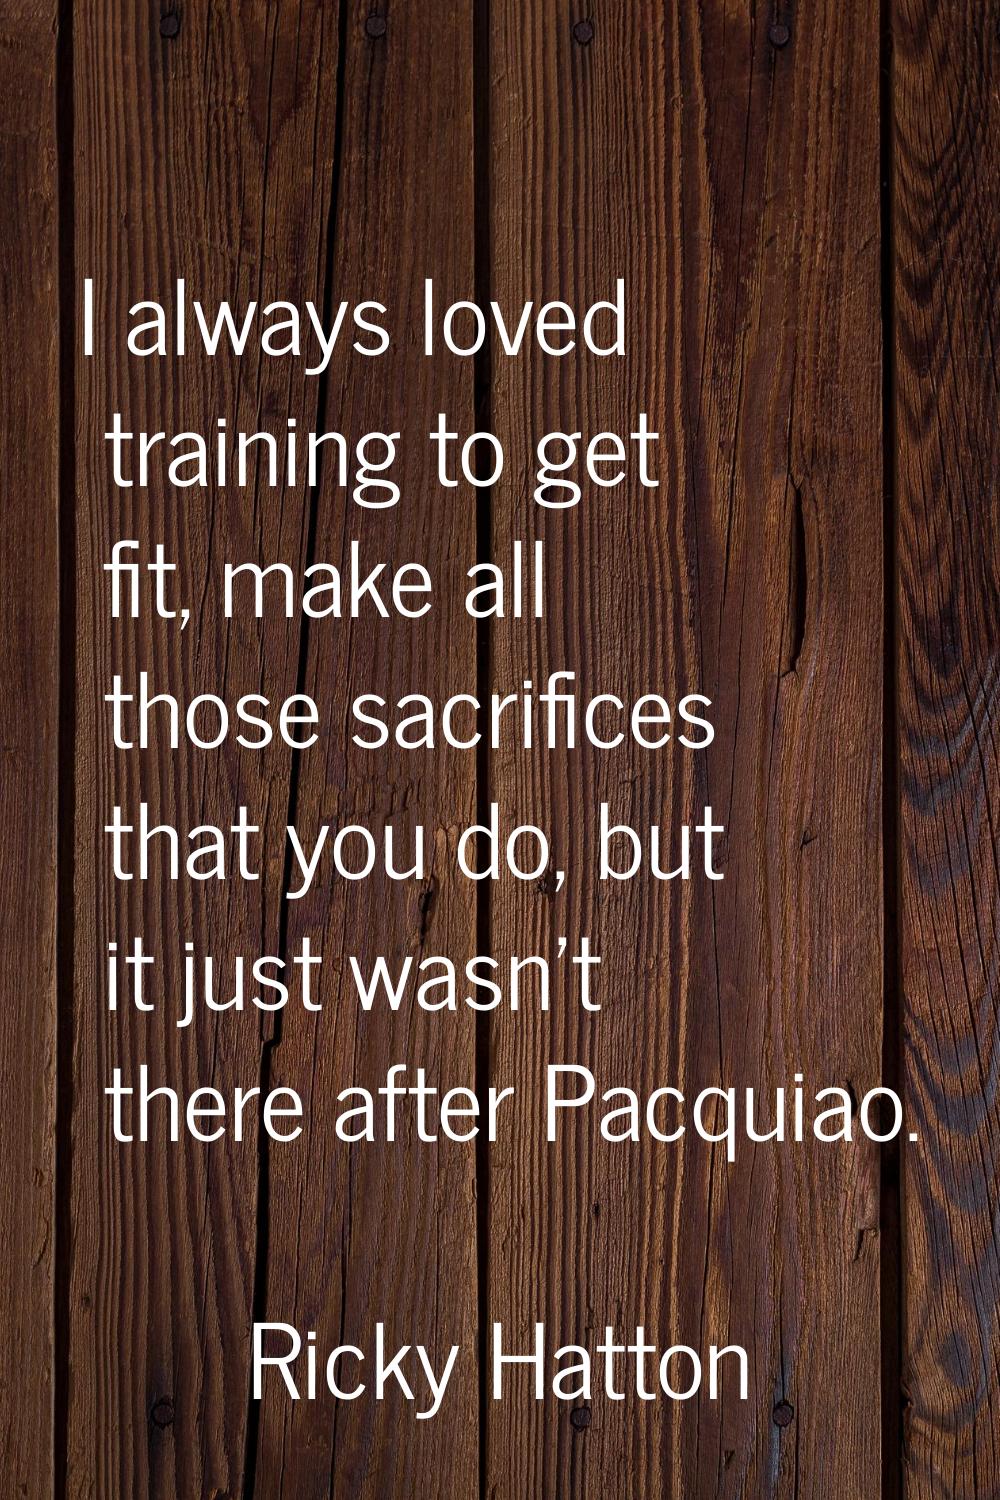 I always loved training to get fit, make all those sacrifices that you do, but it just wasn't there